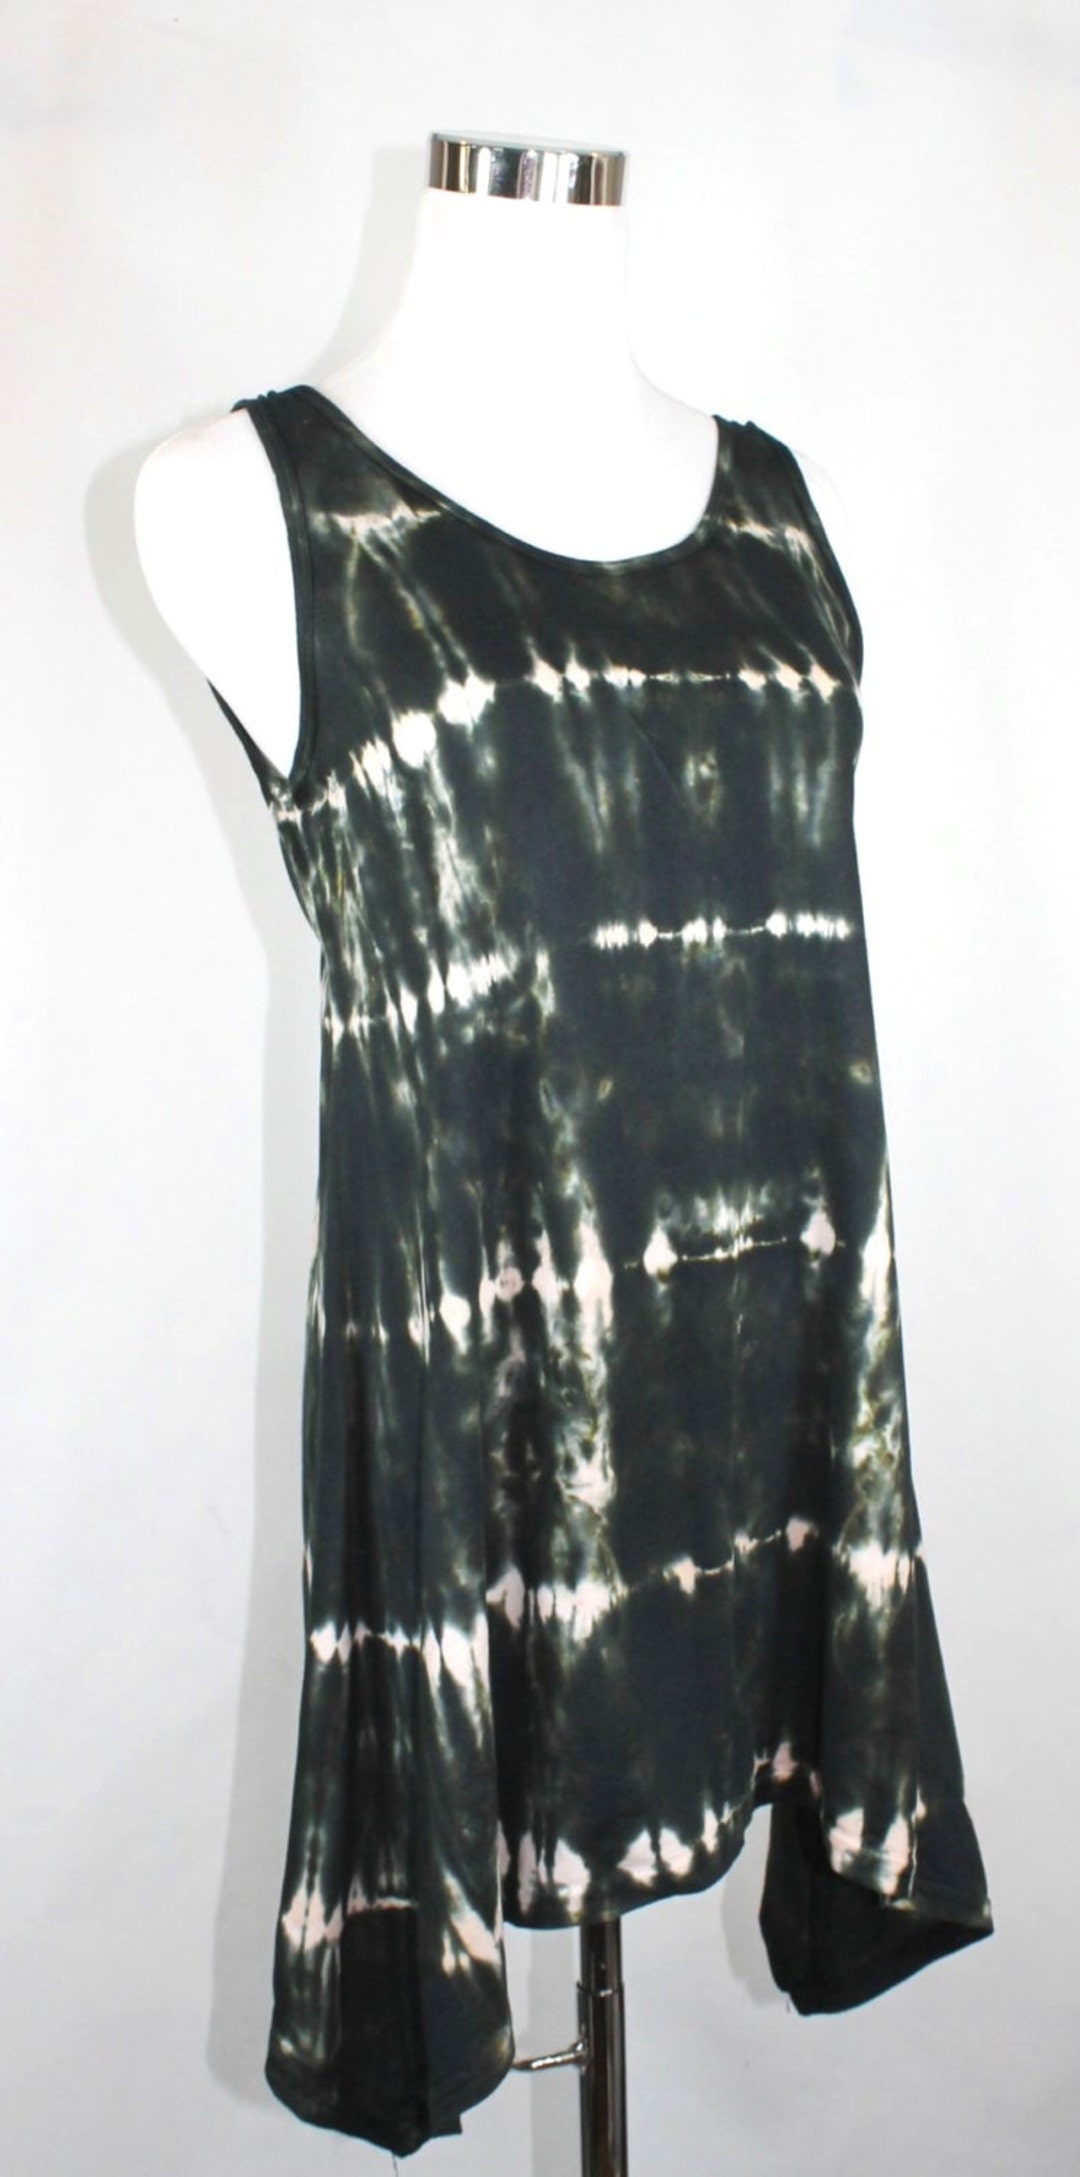 Cotton Tank Top Hand Dyed Tunic Tie Dyed Tunic Top Black - Etsy